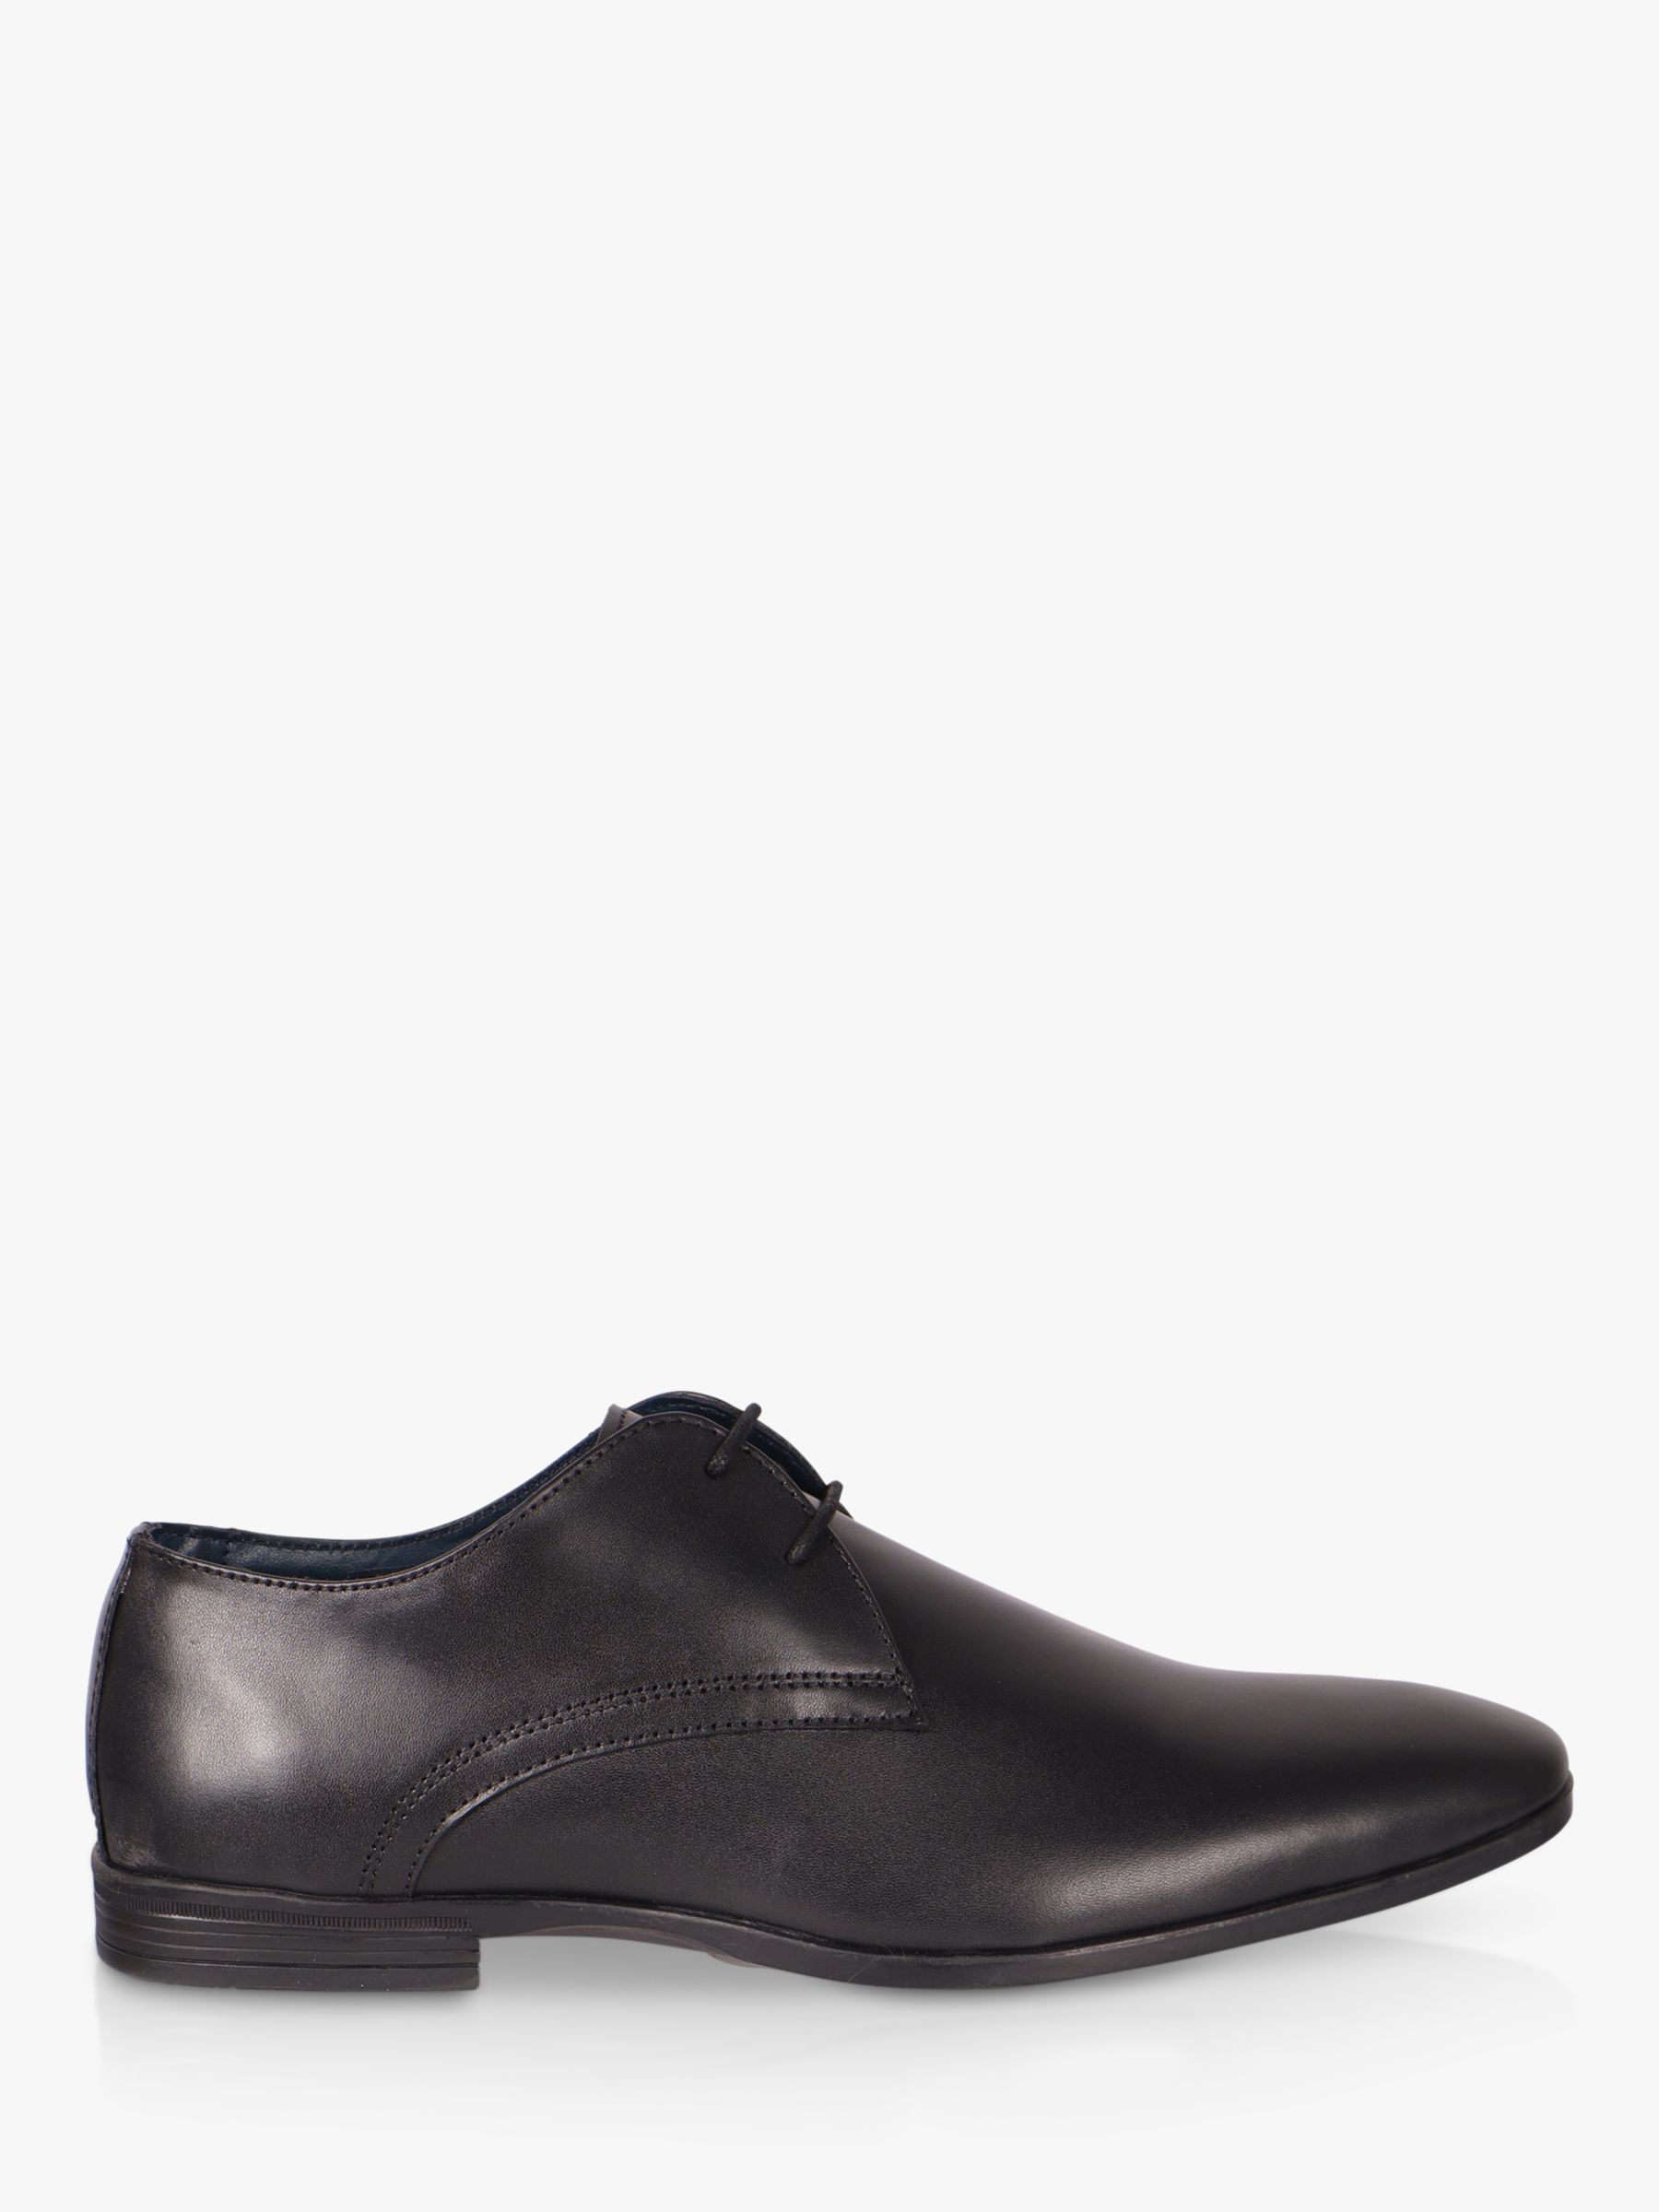 Silver Street London Craven Leather Brogues, Black, 10